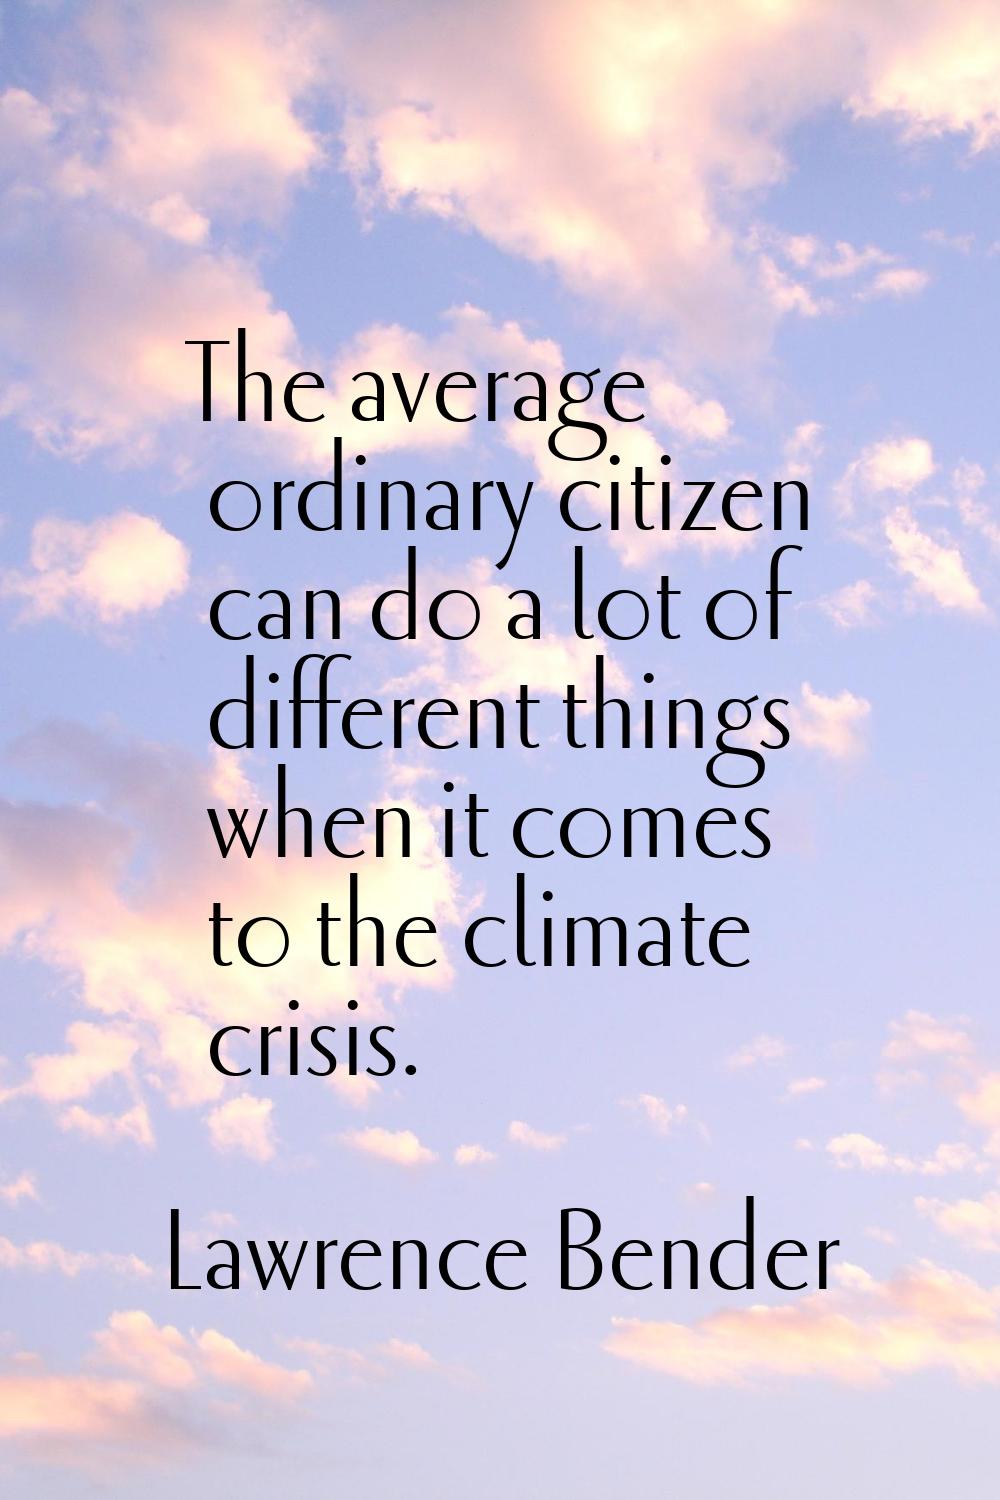 The average ordinary citizen can do a lot of different things when it comes to the climate crisis.